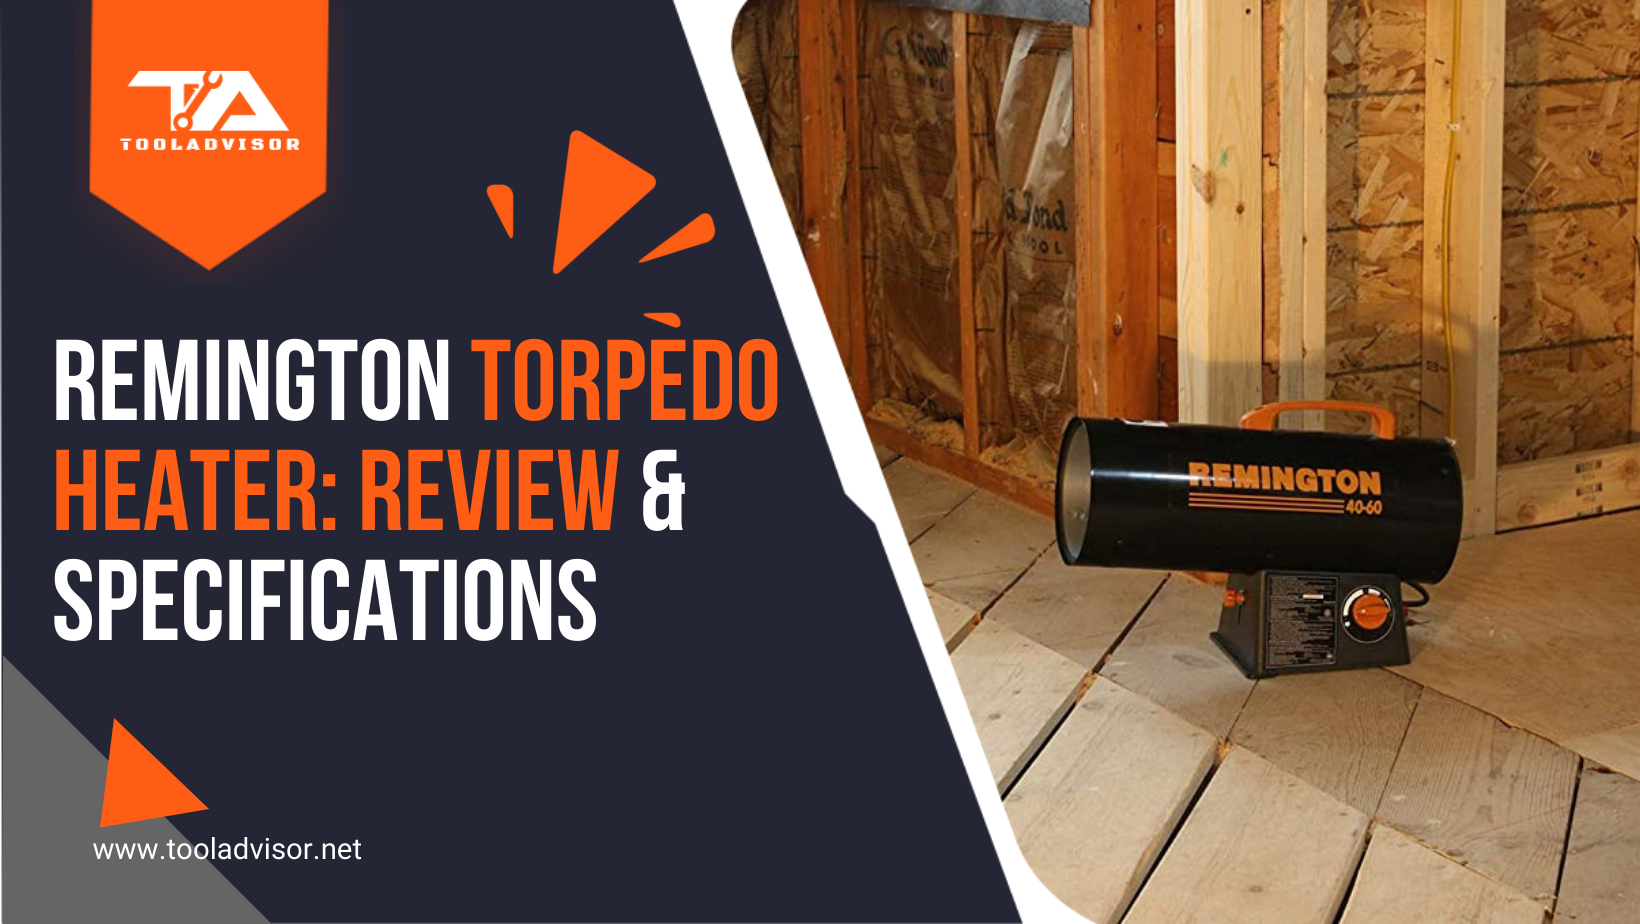 Remington Torpedo Heater: Review & Specifications